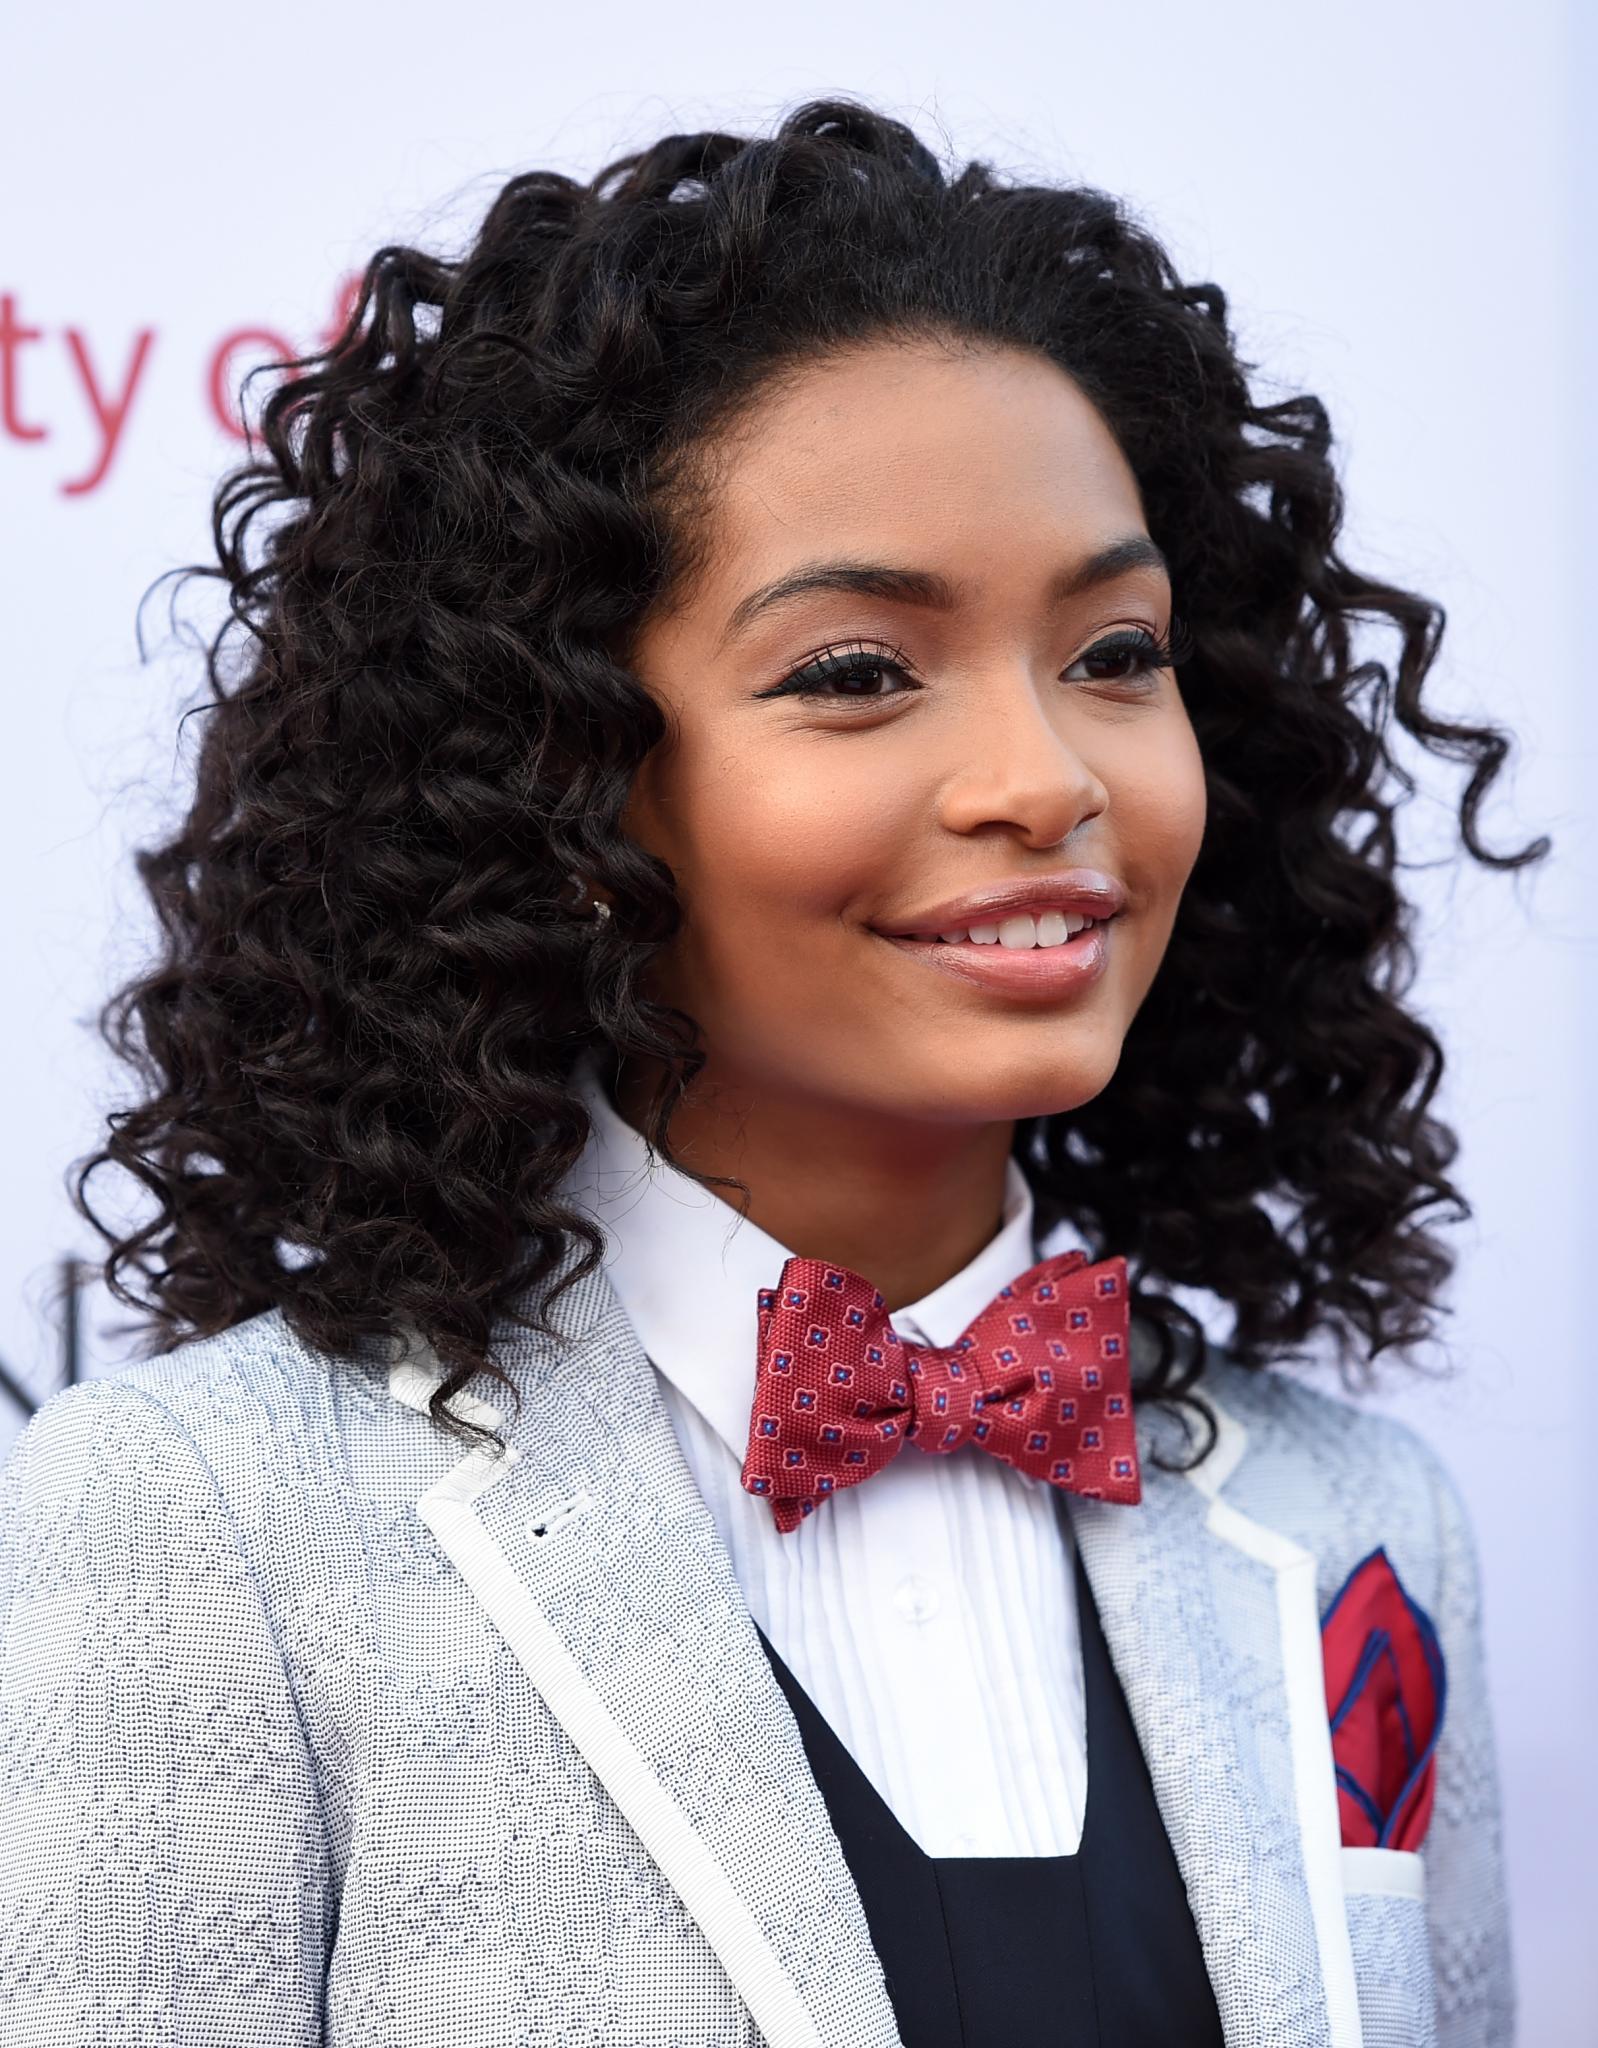 Hollywood Hair: Natural Curls on the Red Carpet